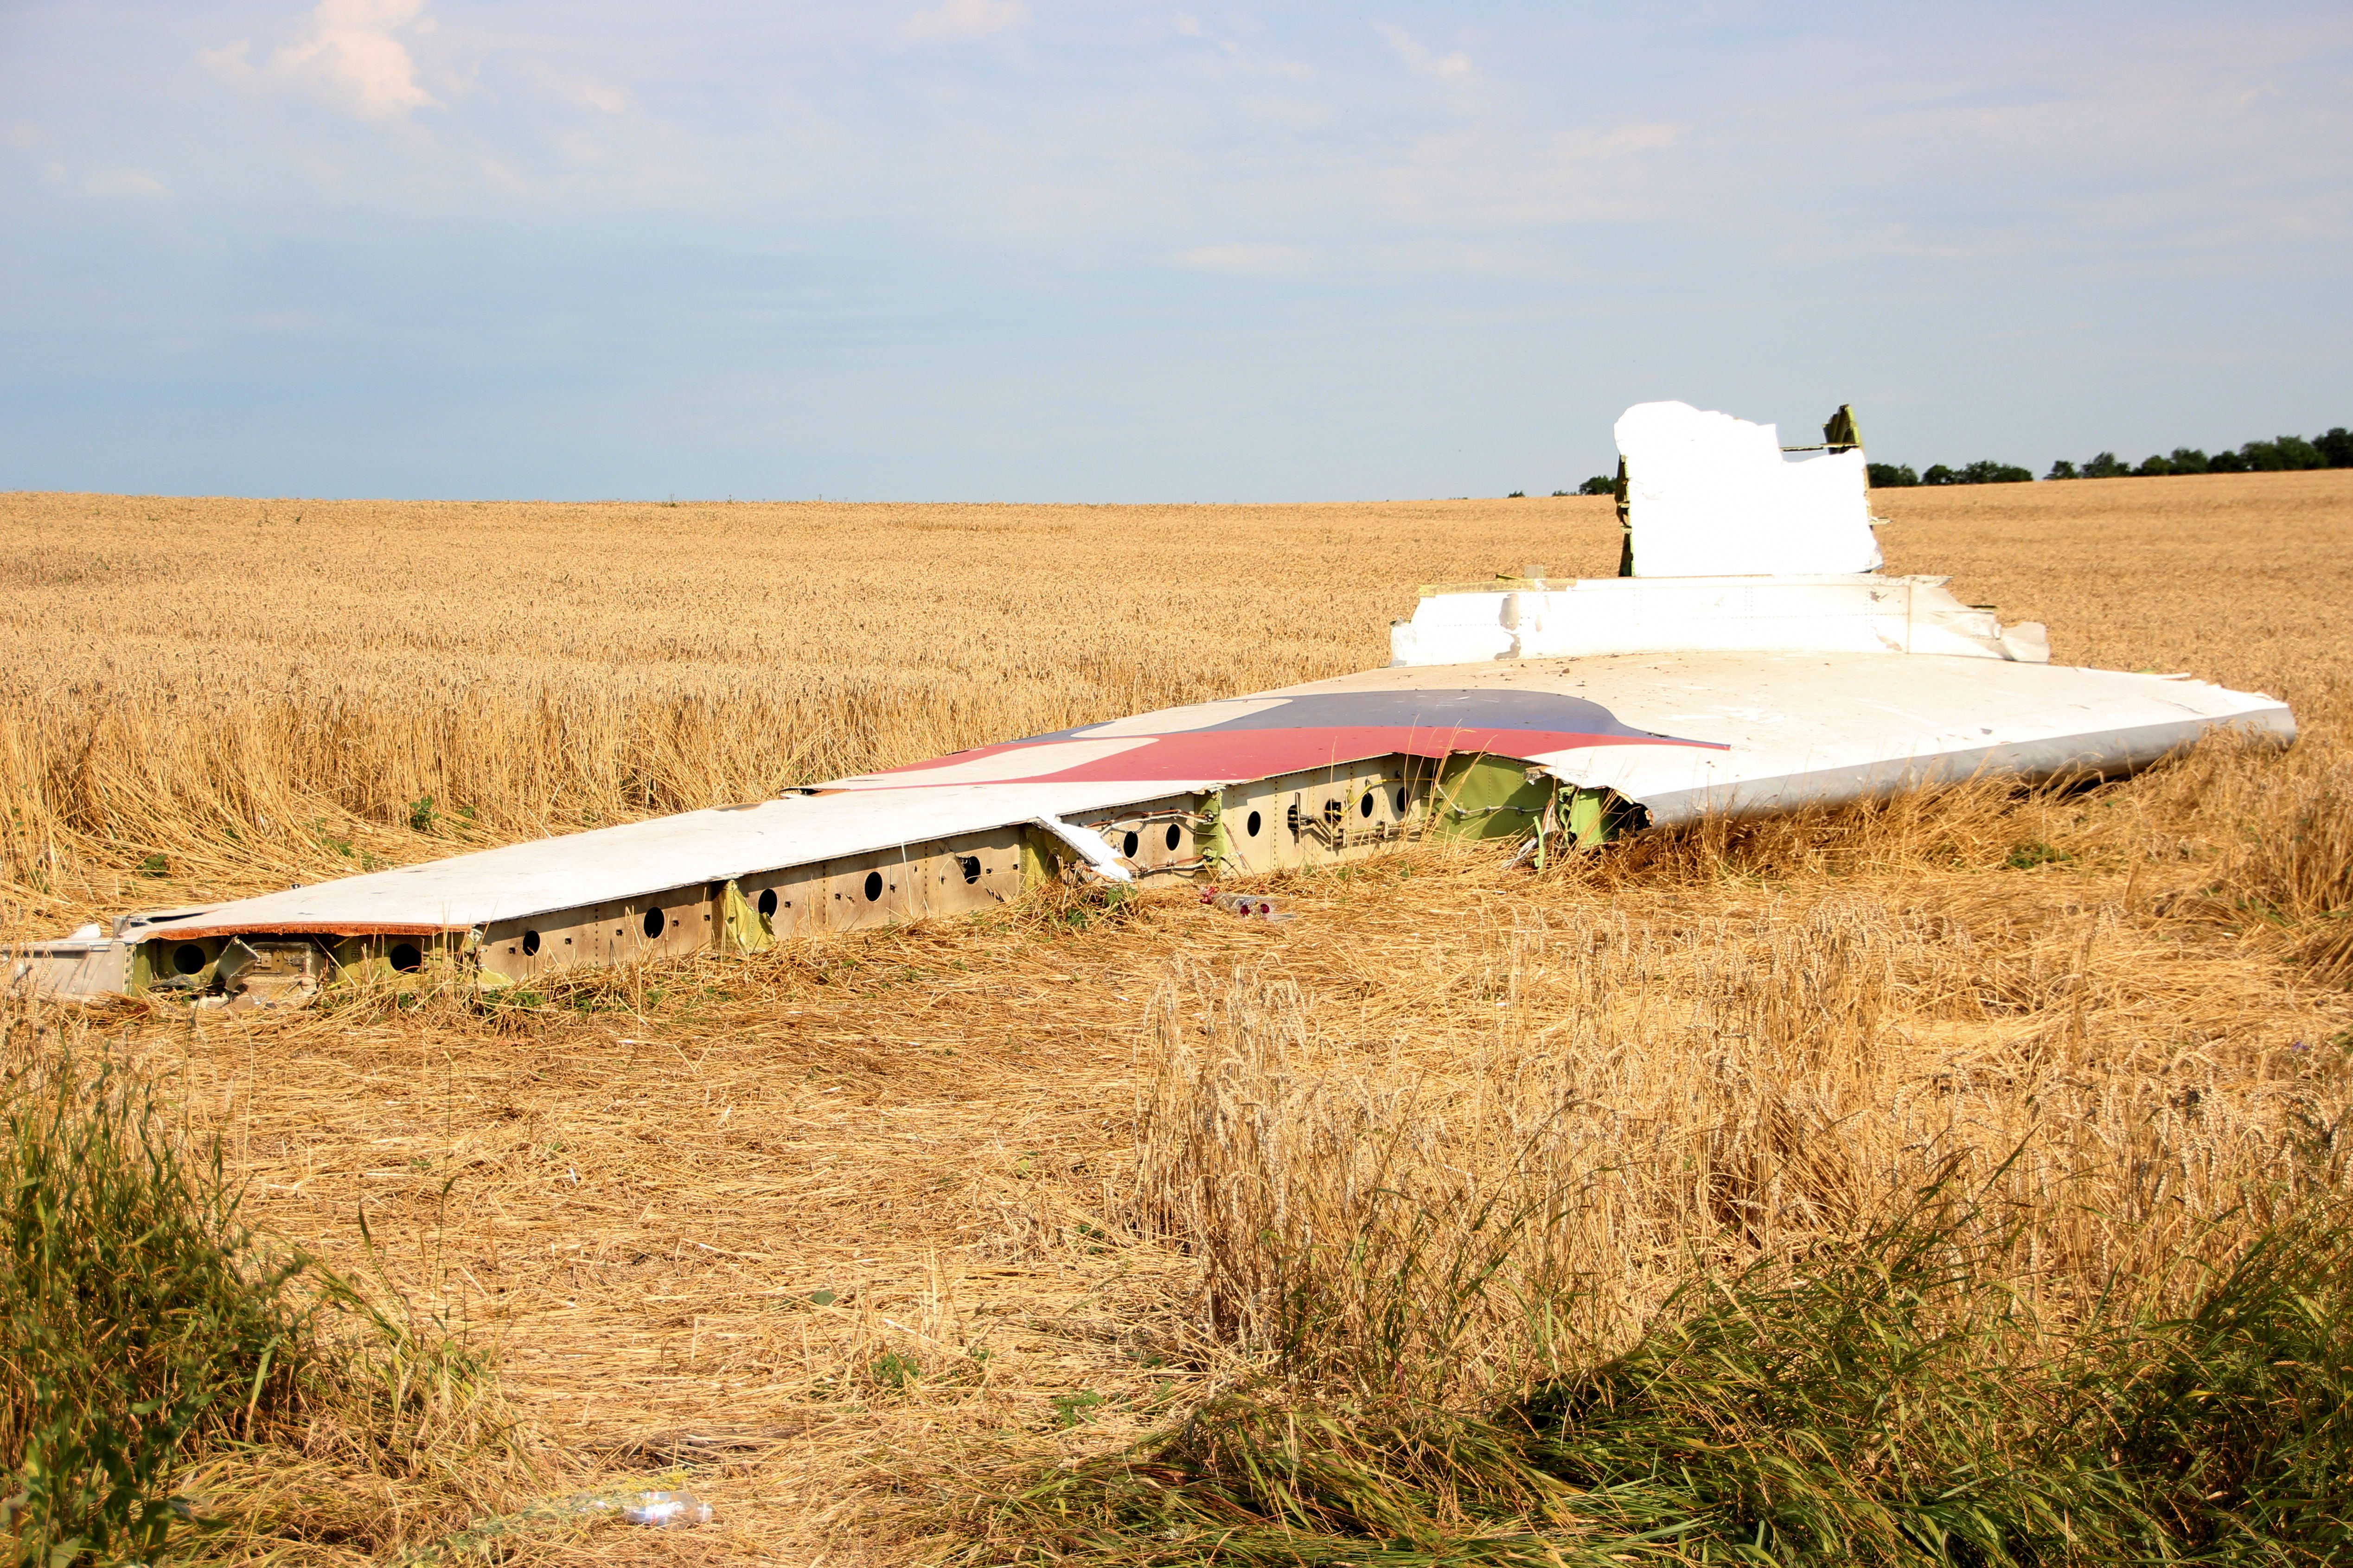 Fragments of the Malaysia Airlines Boeing 777 from Flight MH17 sitting in a field.